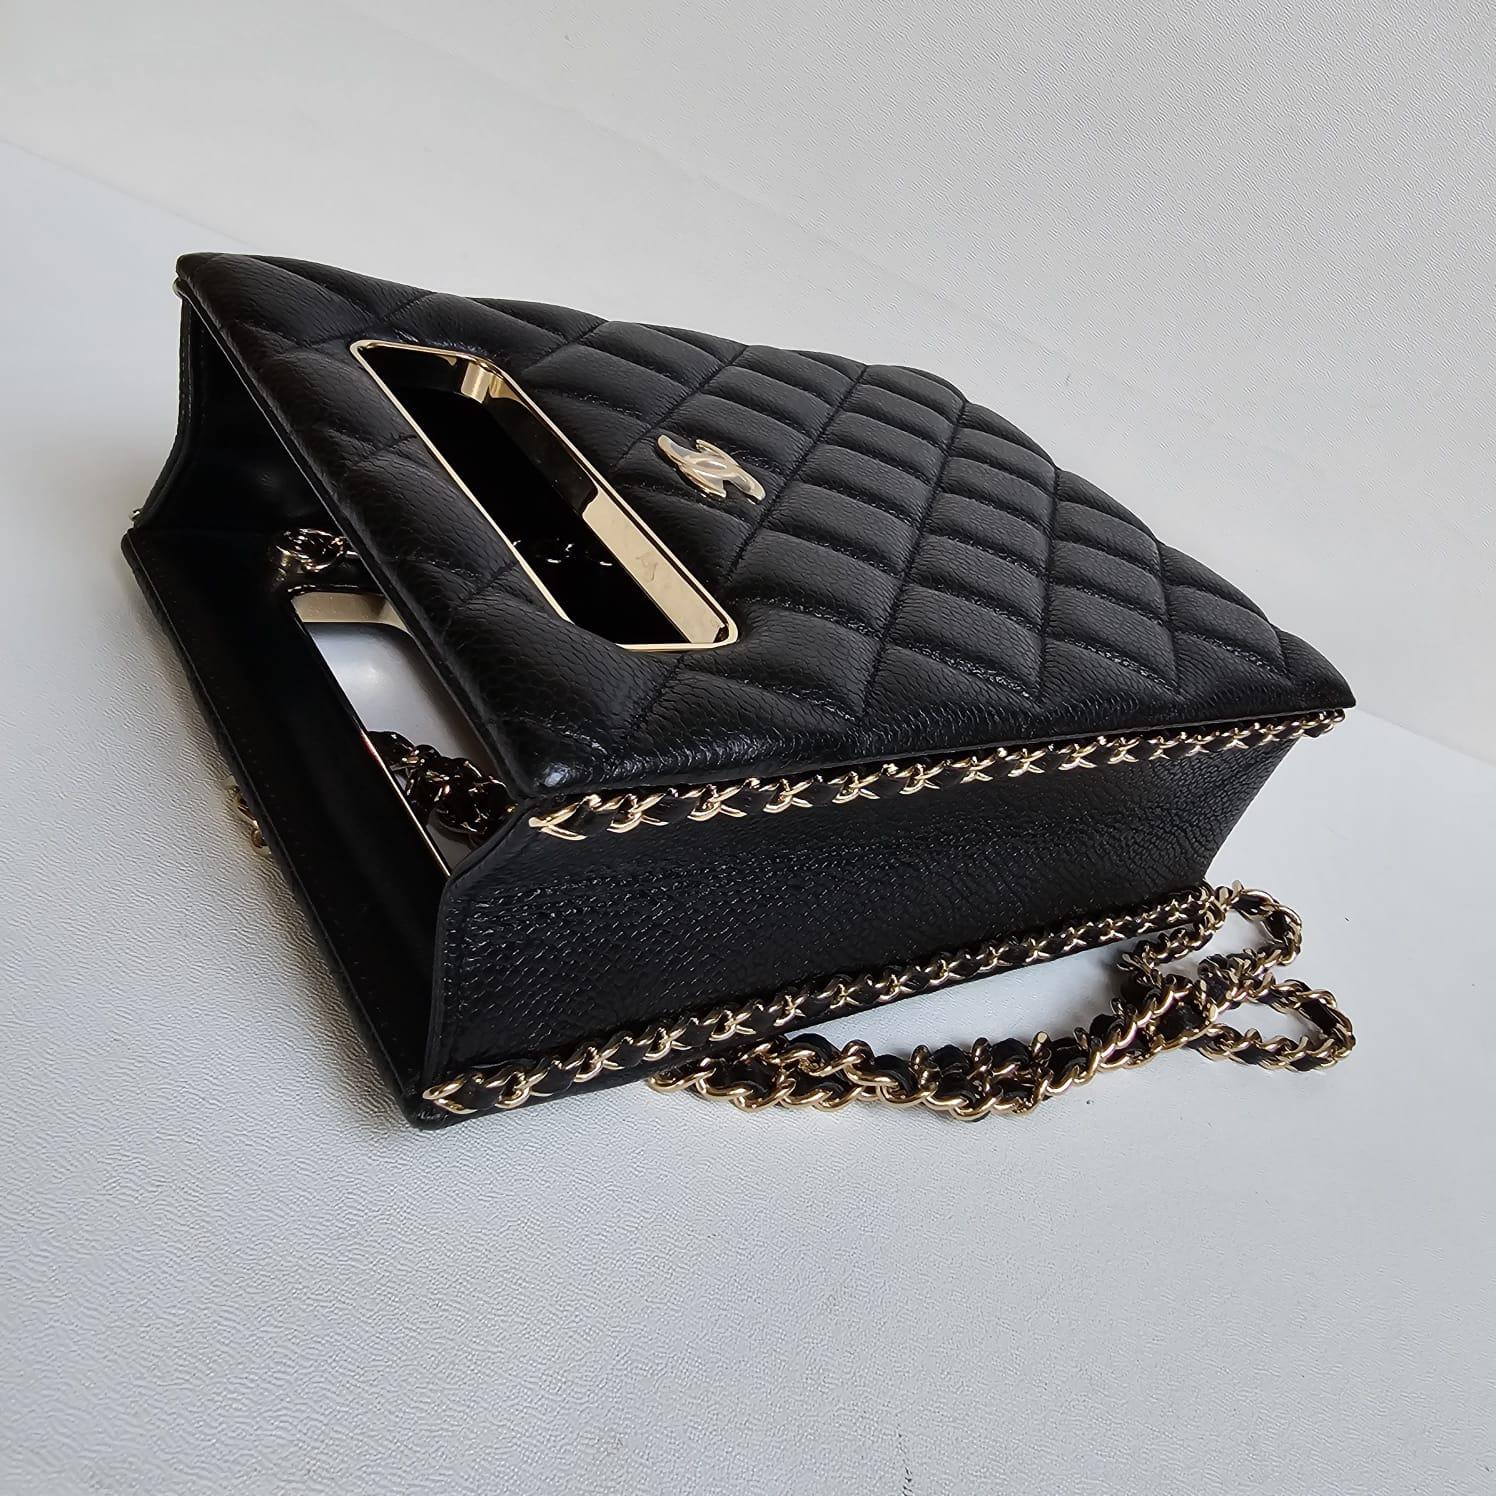 Chanel Black Caviar Quilted Evening Box Bag For Sale 2